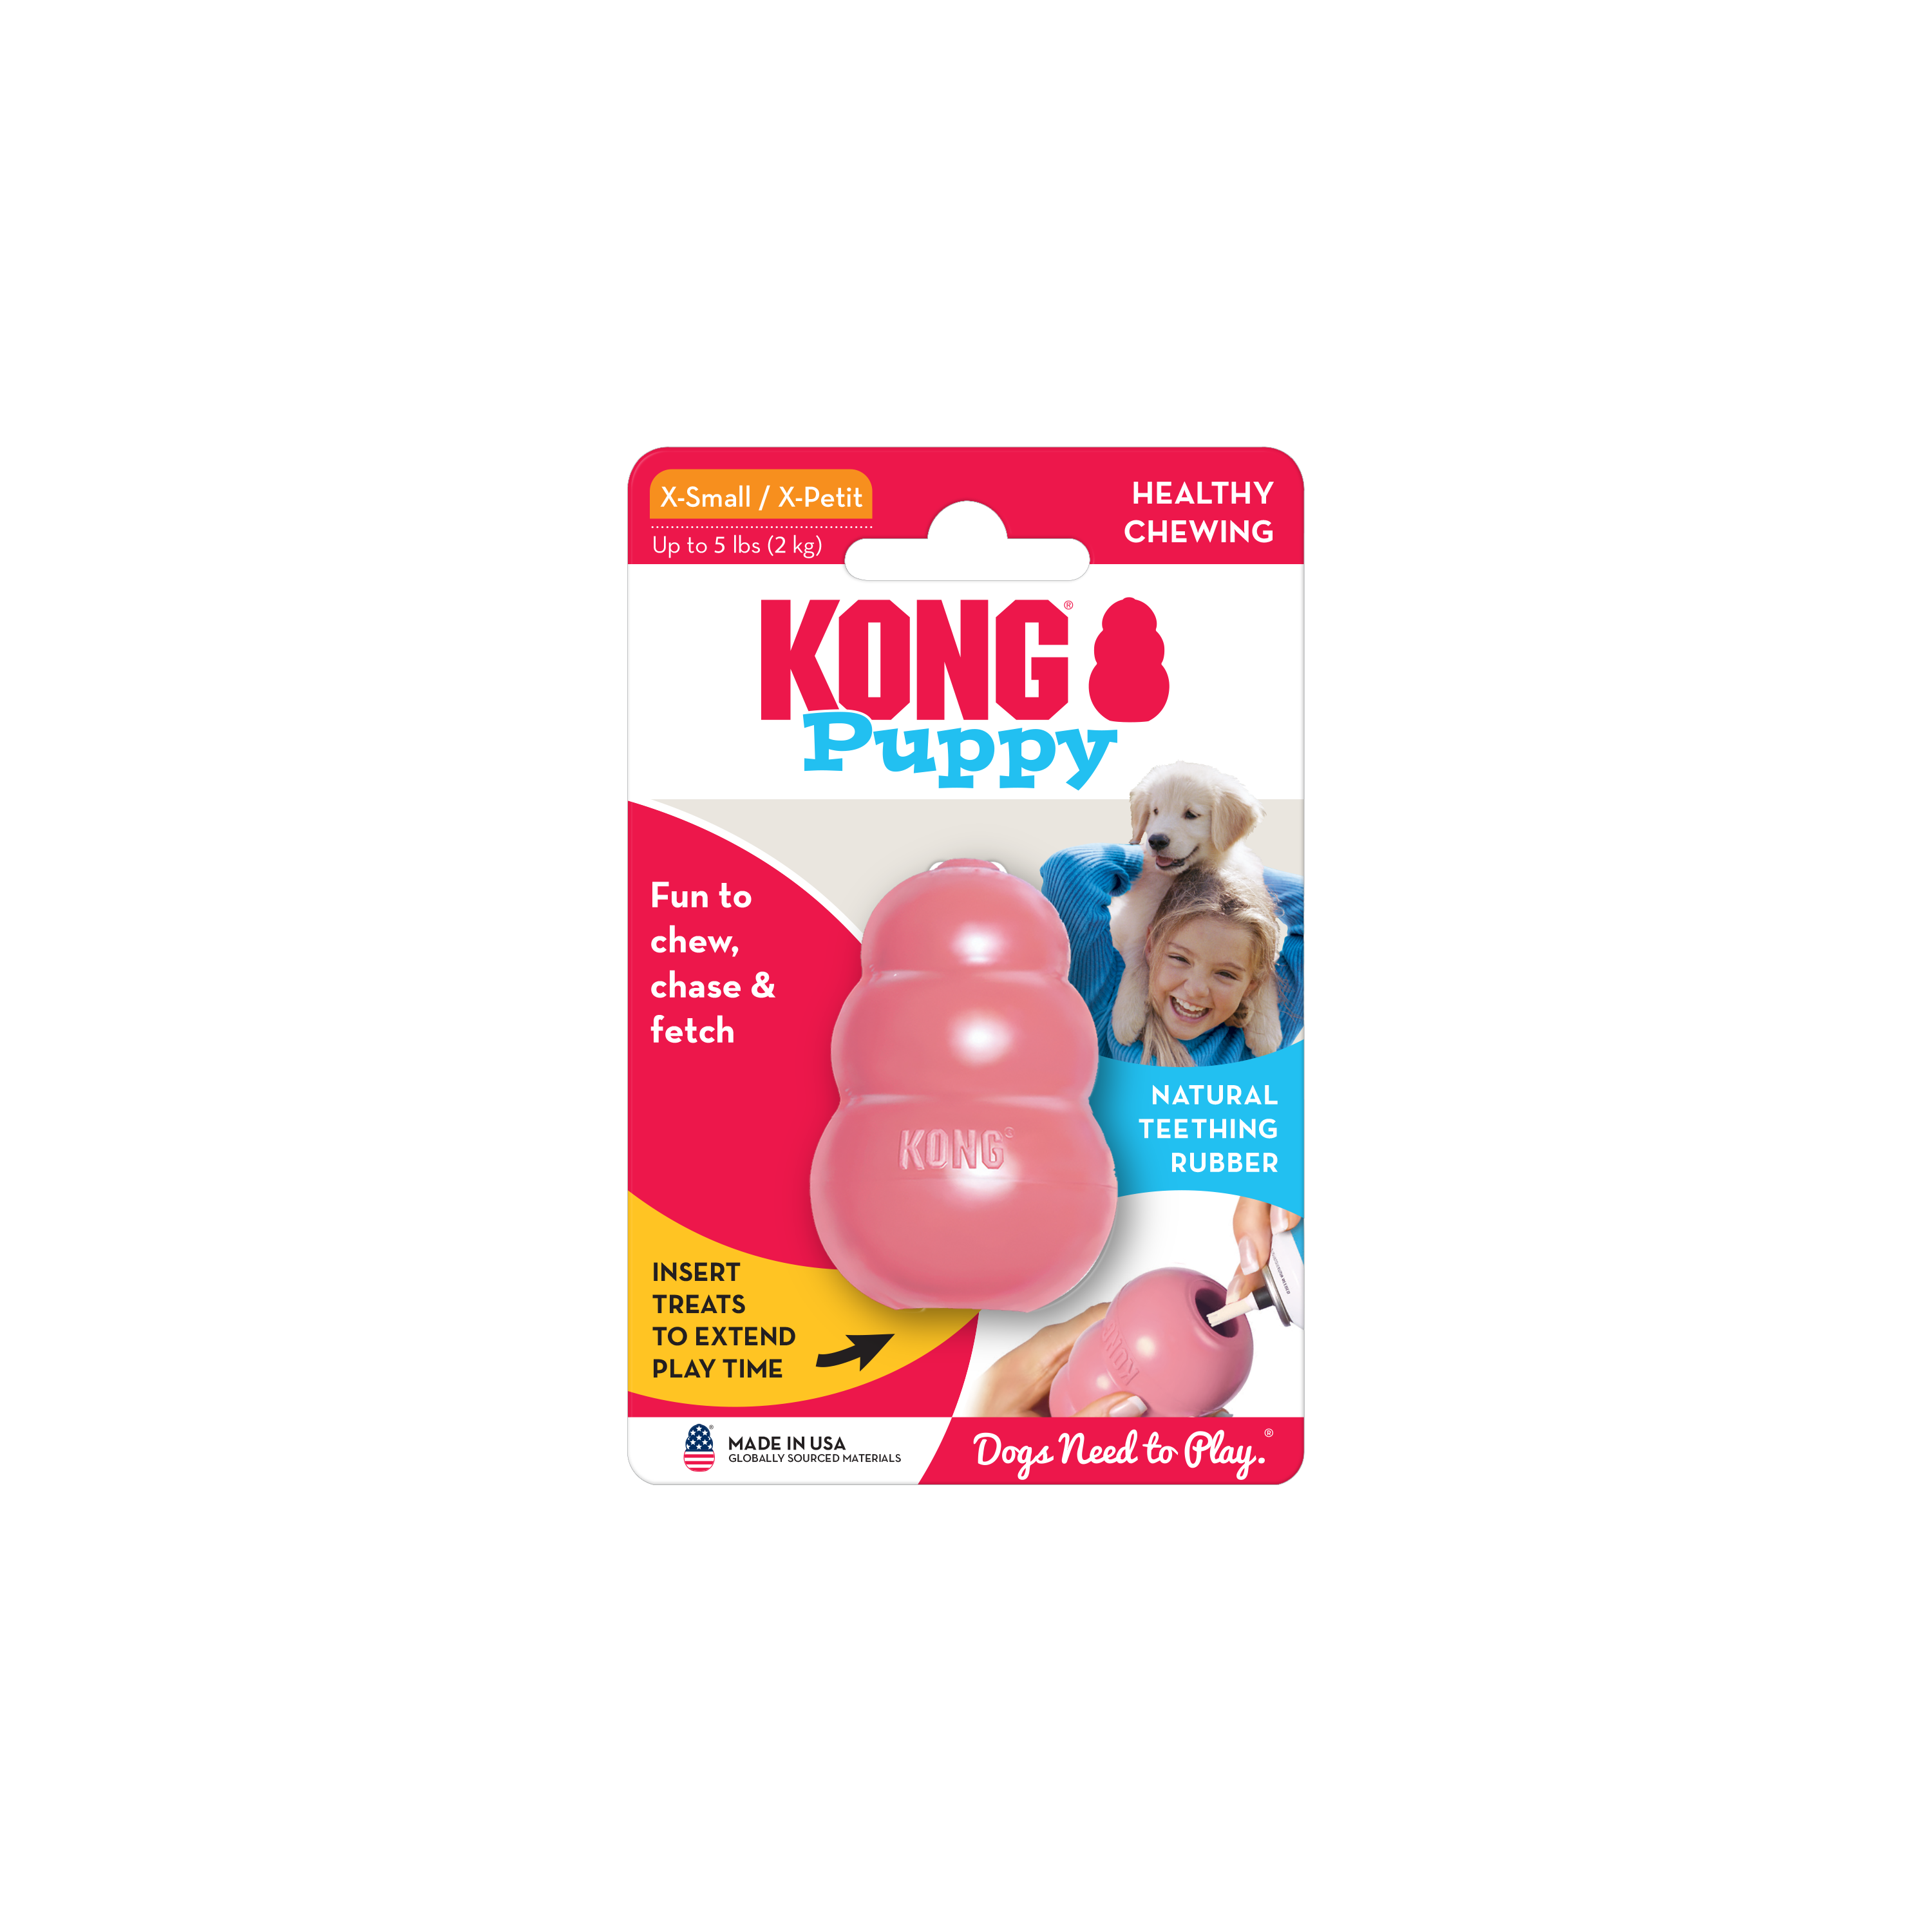 KONG Puppy onpack product image